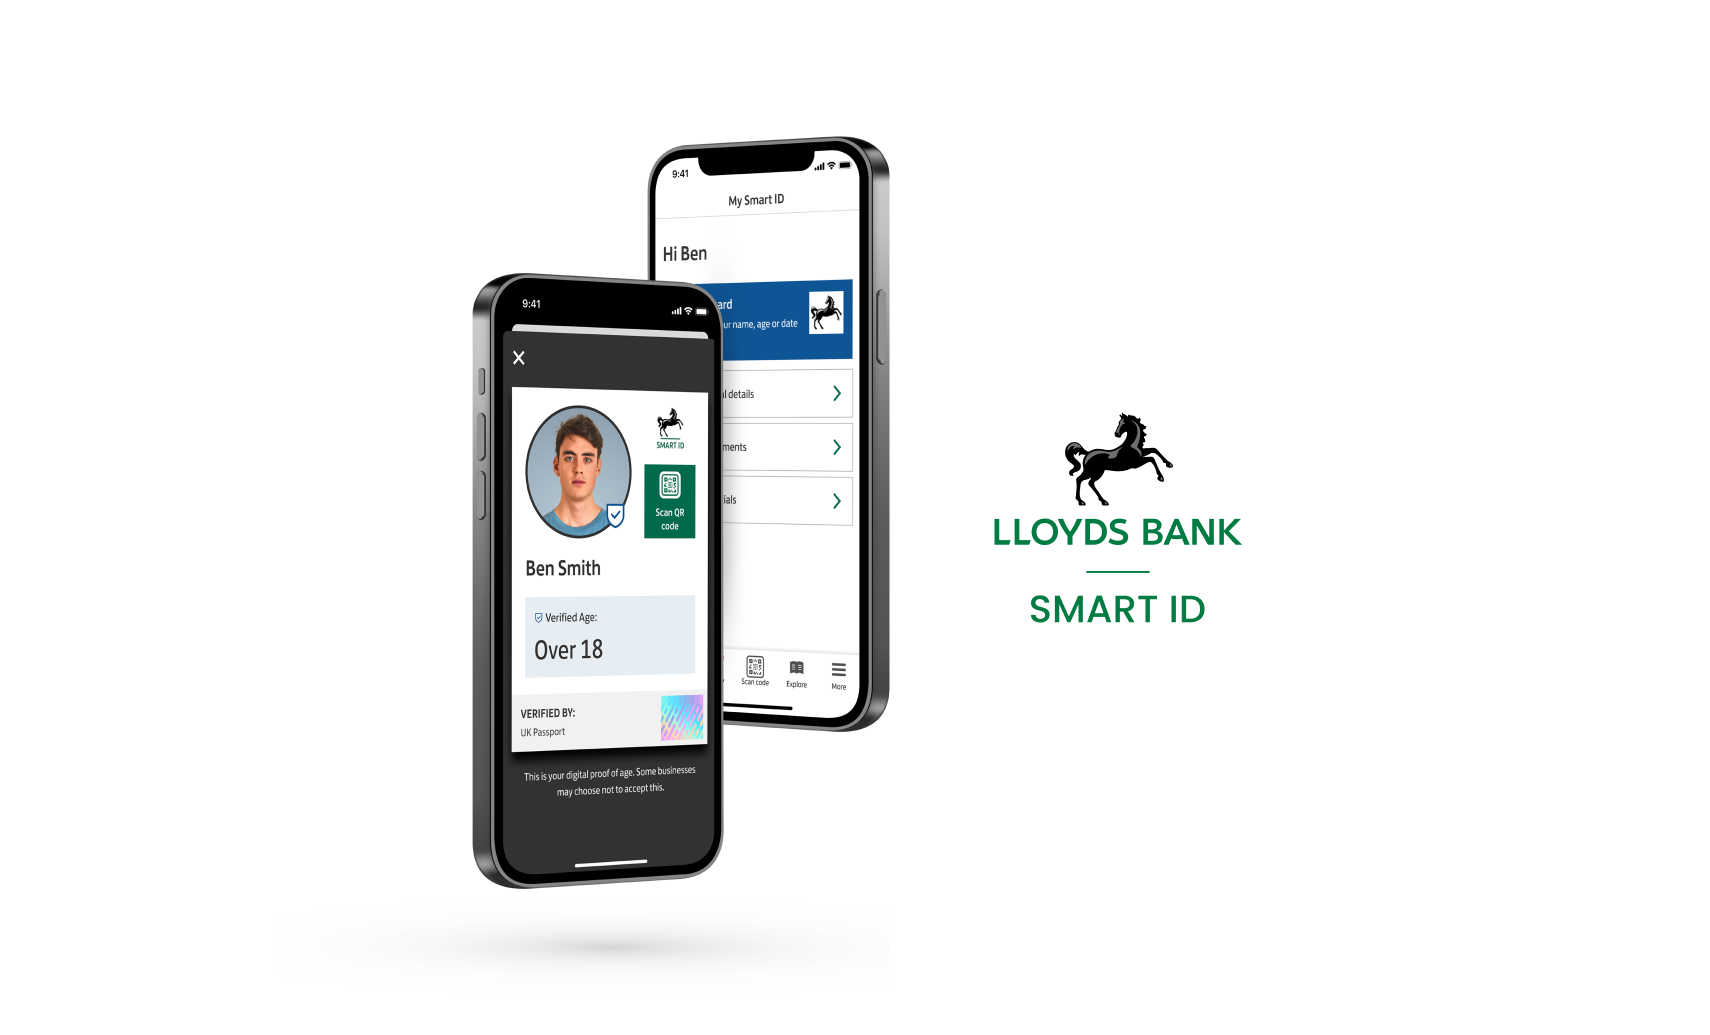 Pages of the Lloyds Bank Smart ID displayed on two smartphone screens